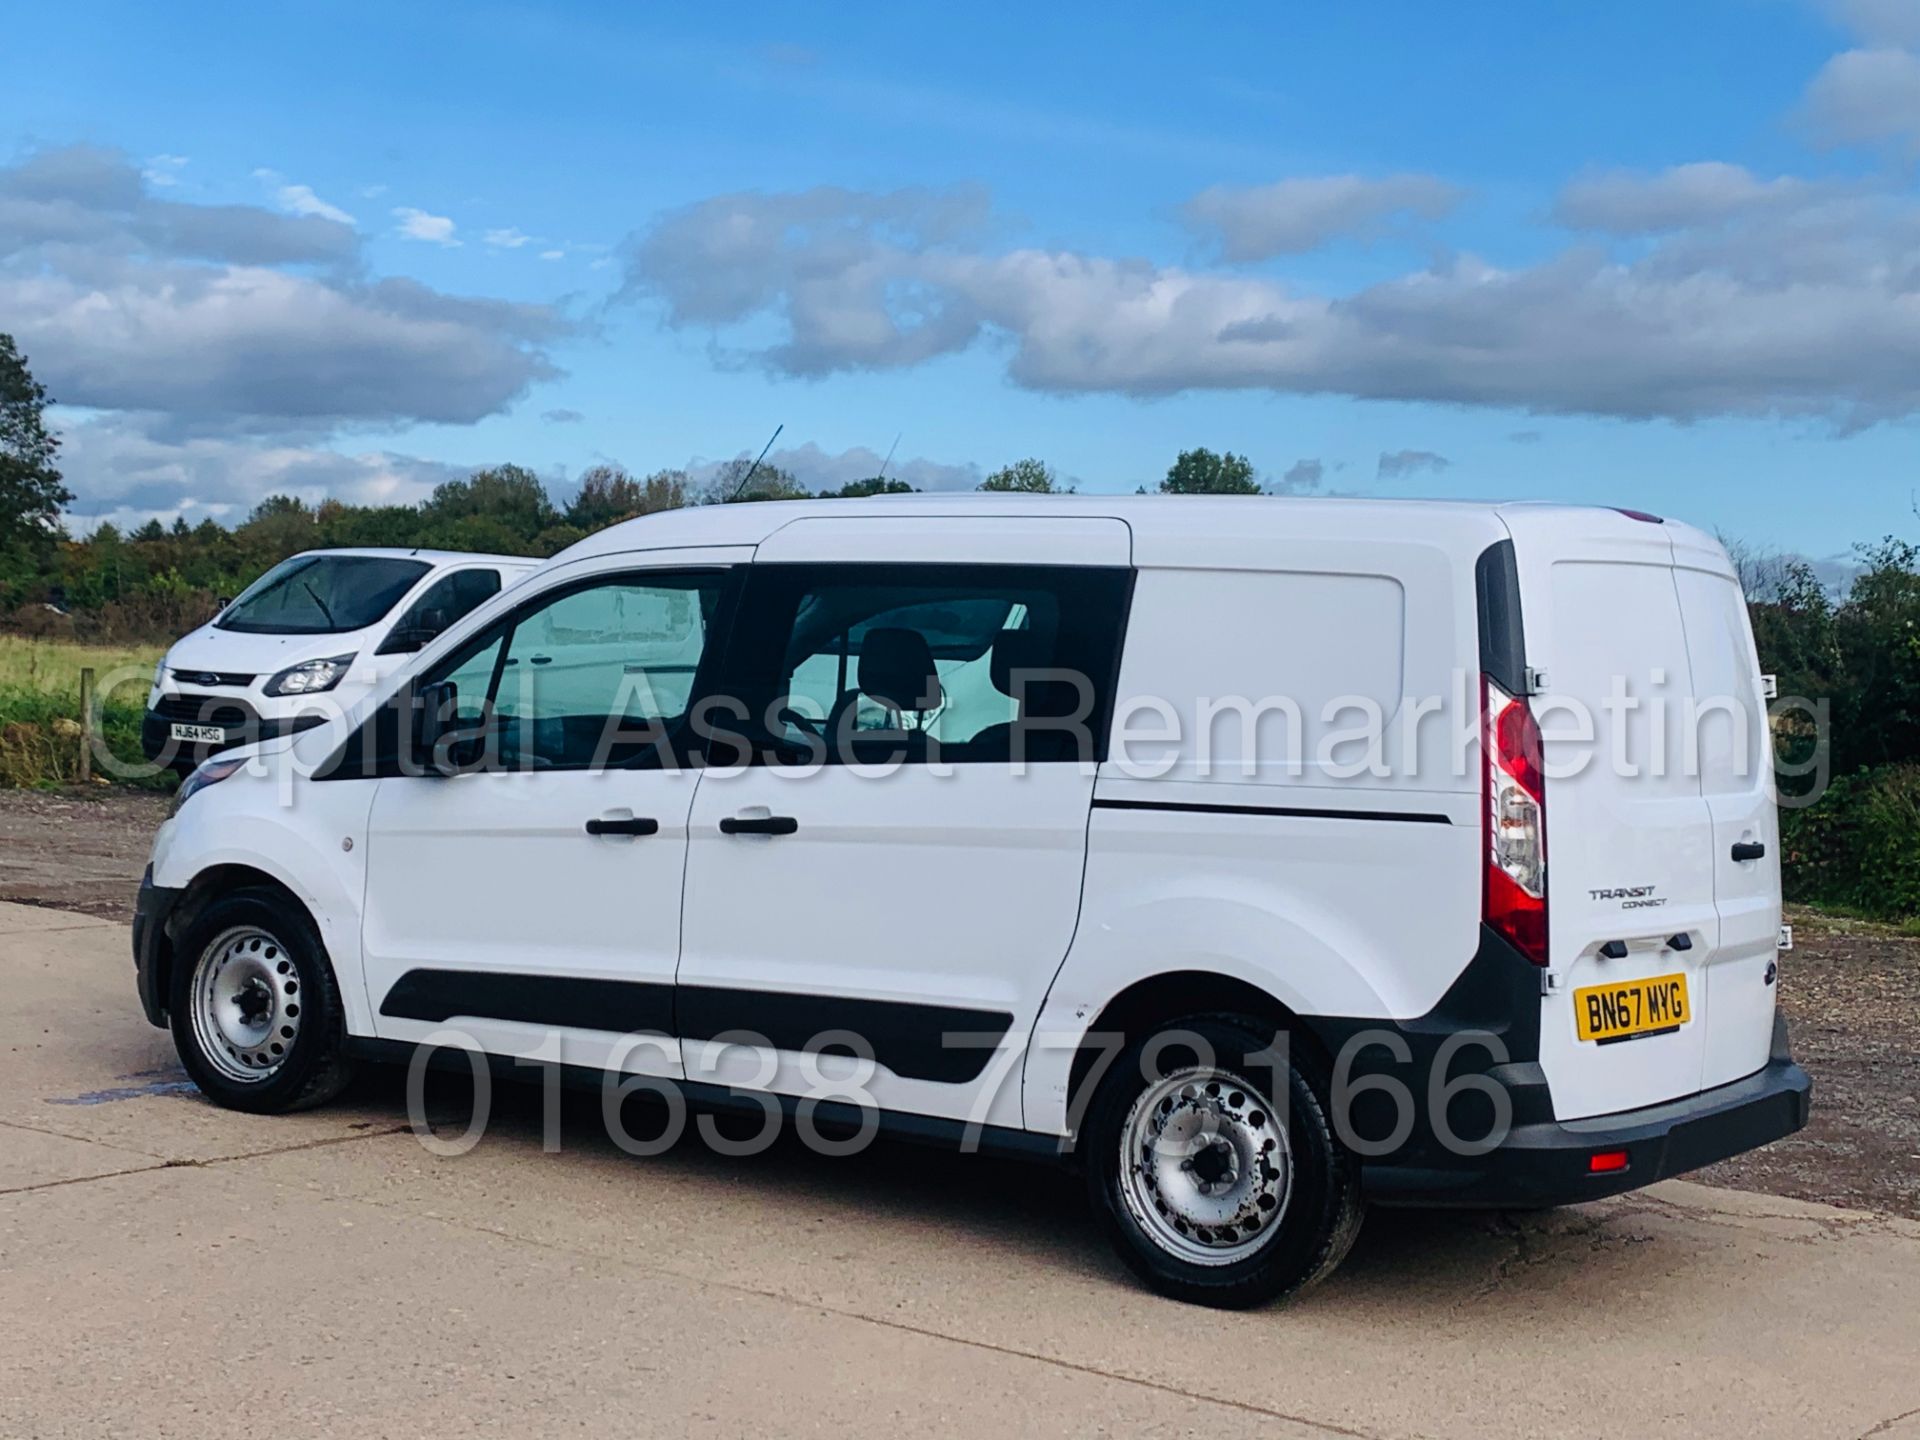 (ON SALE) FORD TRANSIT CONNECT *LWB - 5 SEATER CREW VAN* (2018 - EURO 6) 1.5 TDCI *A/C* (1 OWNER) - Image 5 of 40